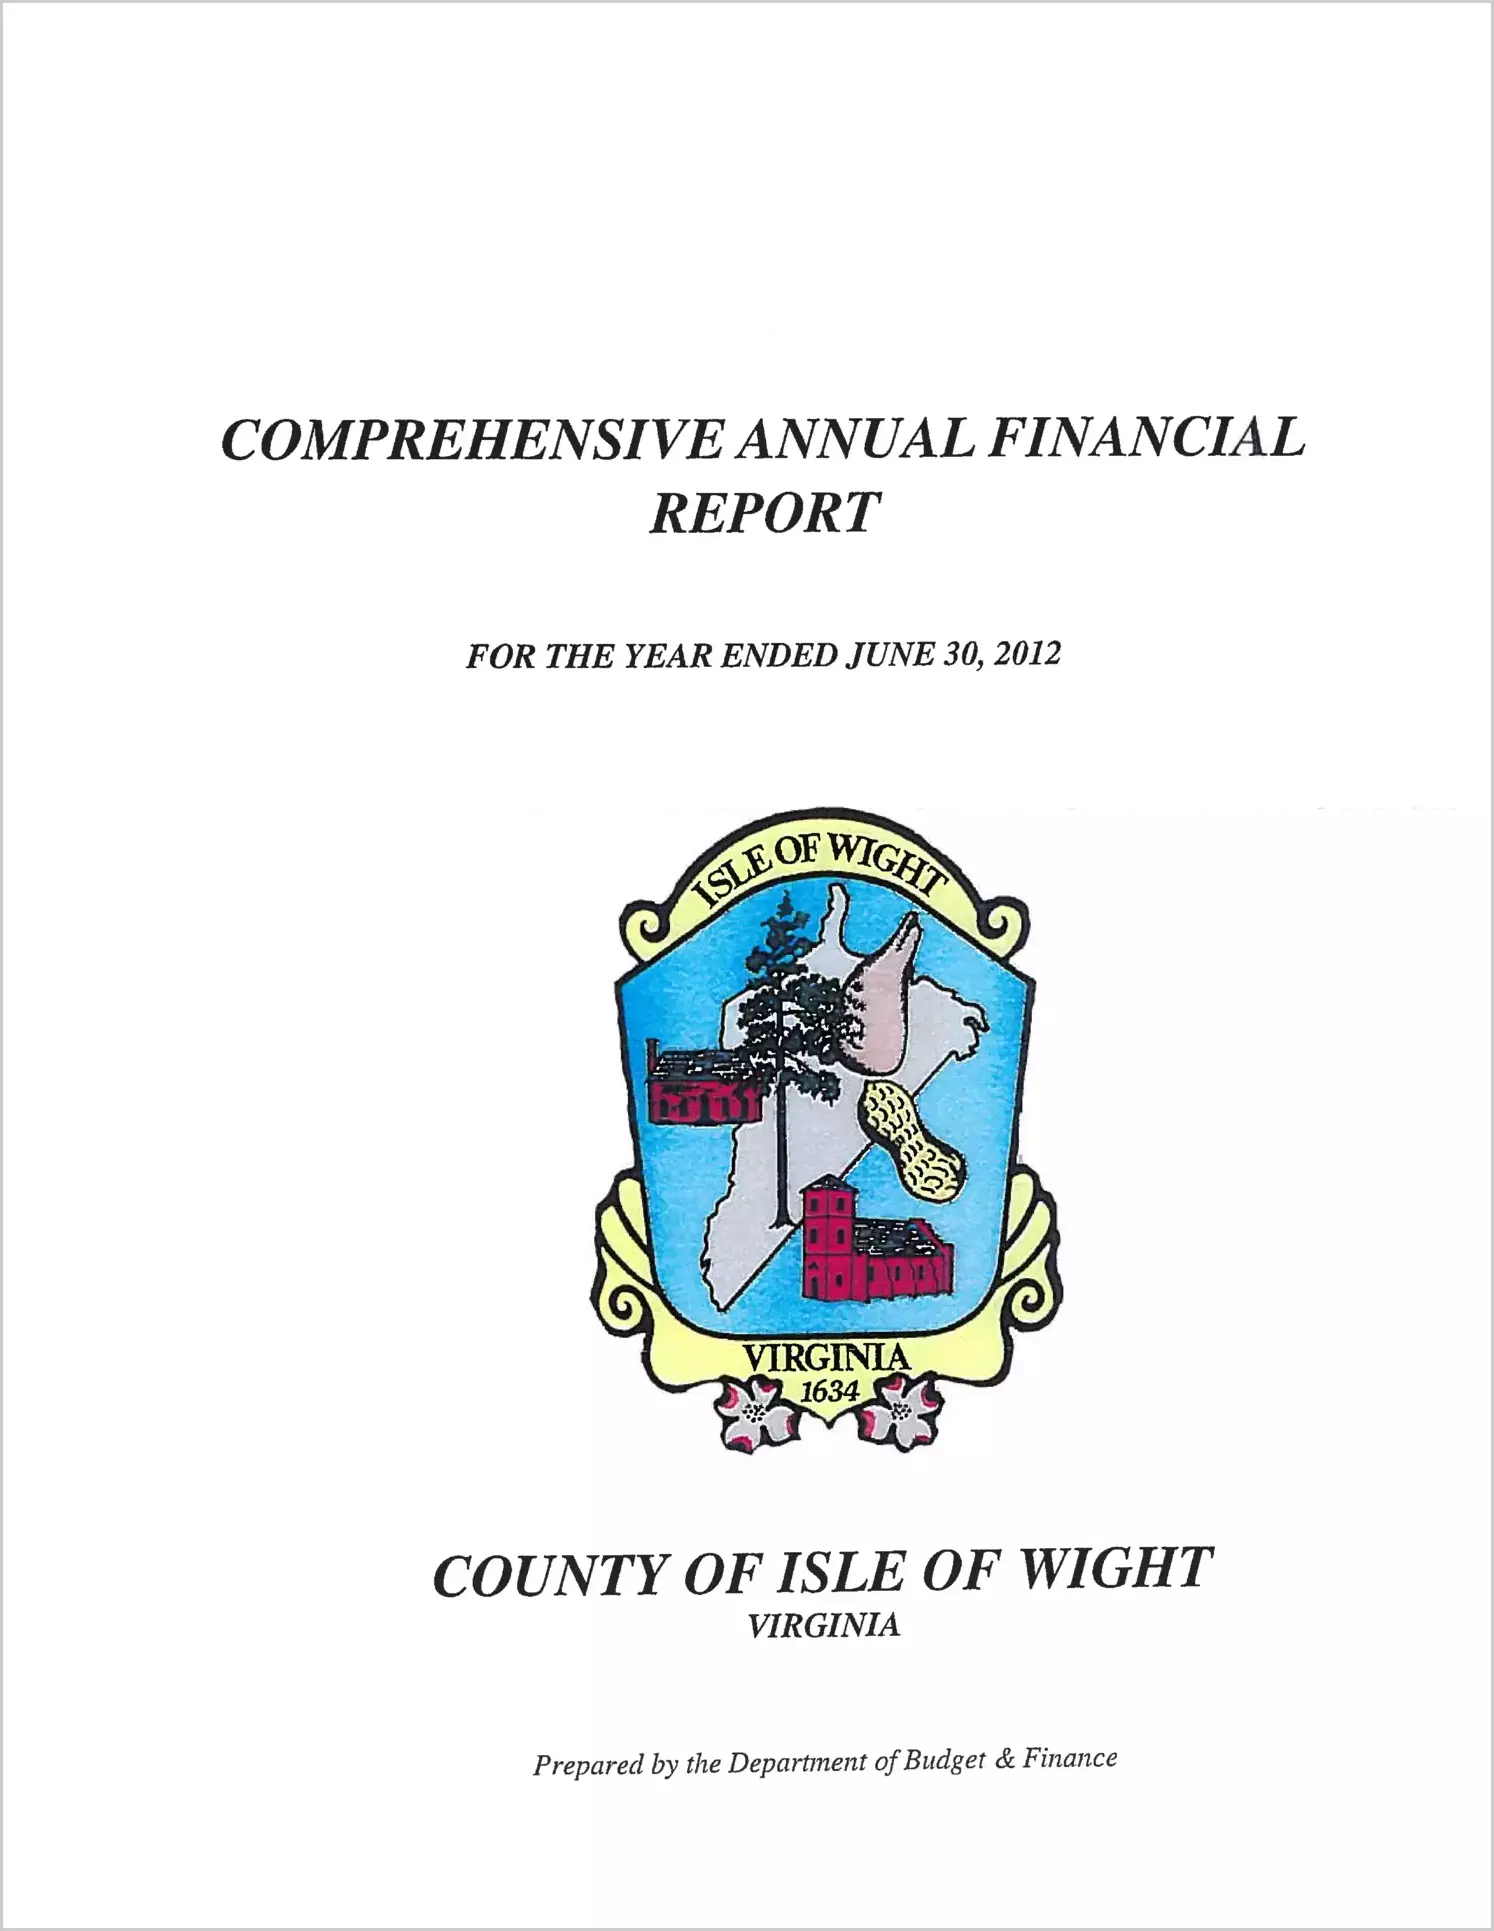 2012 Annual Financial Report for County of Isle of Wight